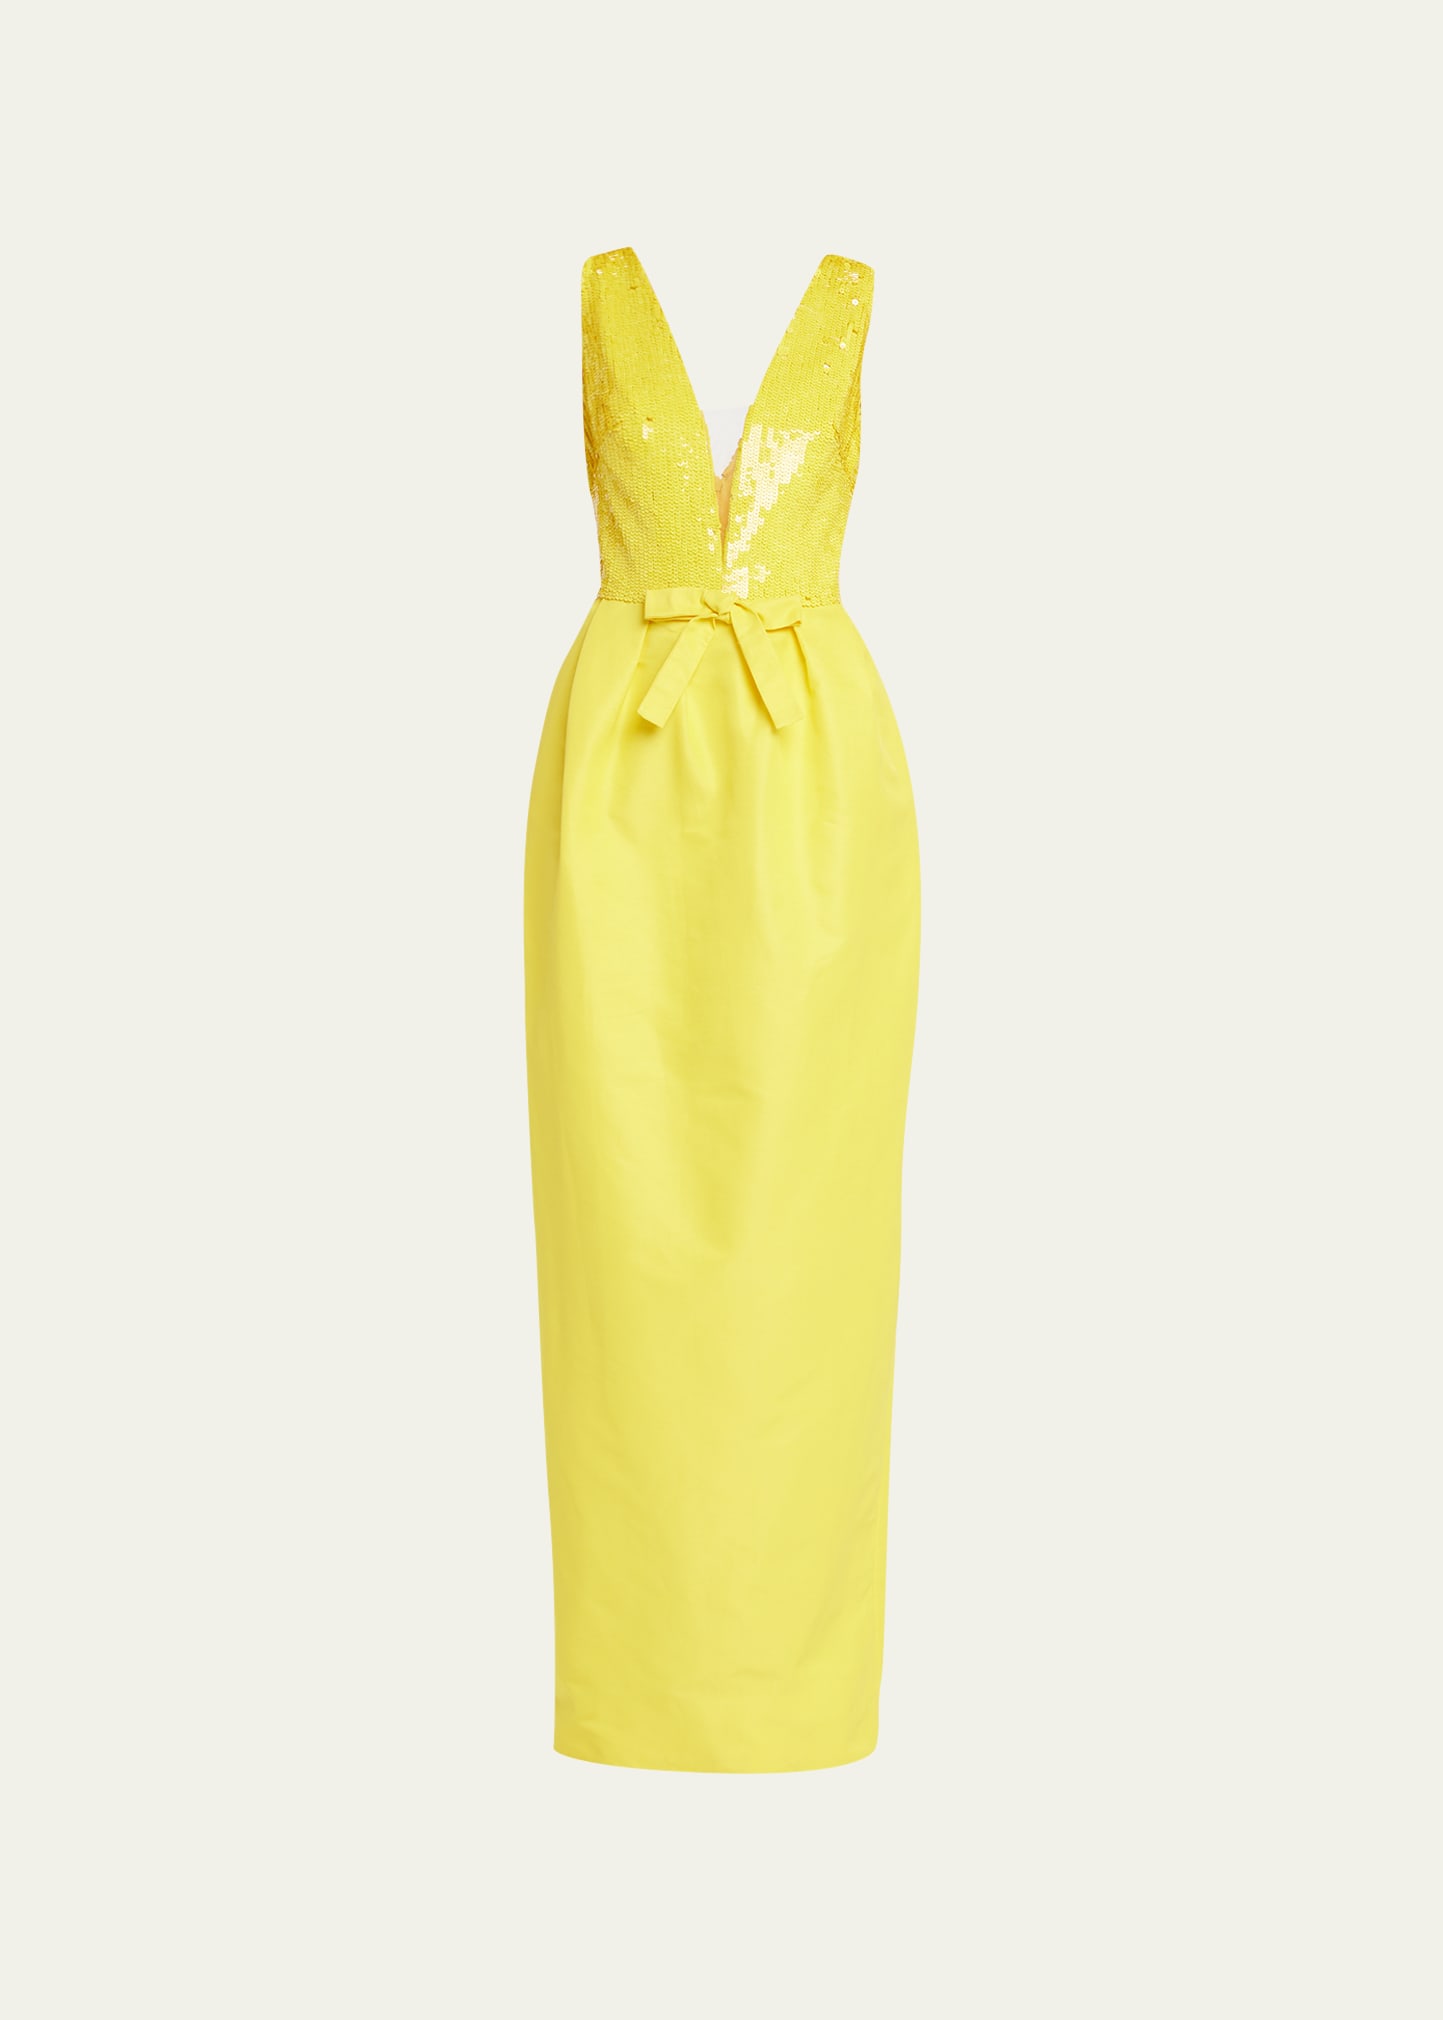 Monique Lhuillier Faille Sequin Deep V-neck Gown With Bow Detail In Canary Yellow